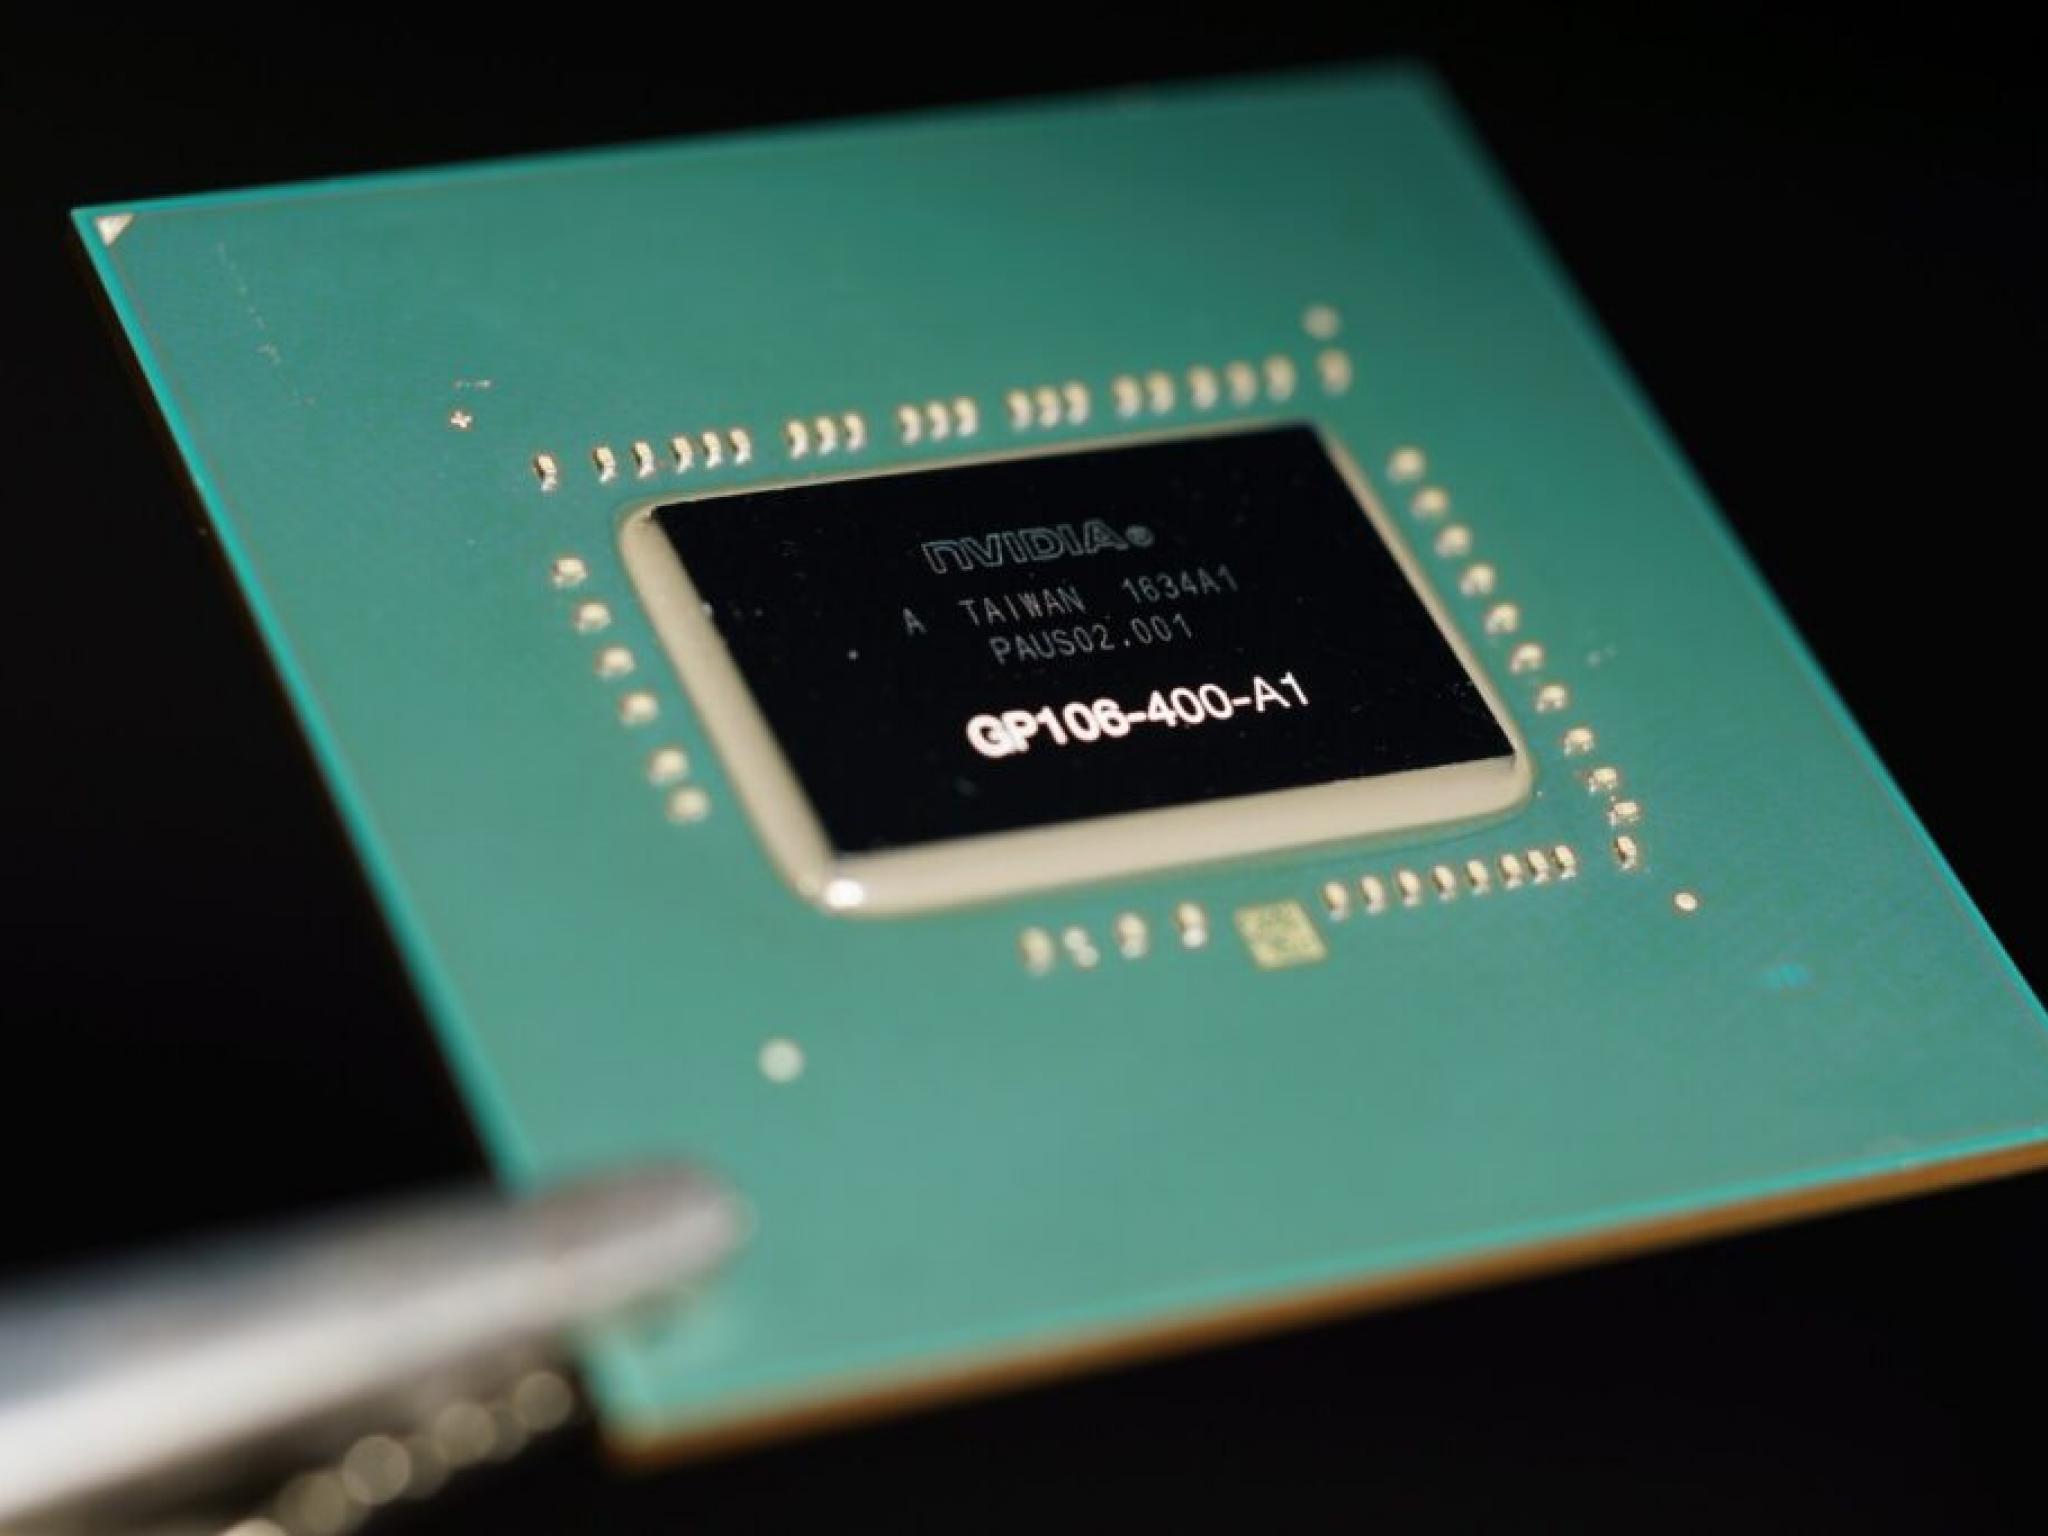  nvidia-could-generate-12b-in-china-with-new-ai-chips-that-comply-with-us-restrictions-report-corrected 